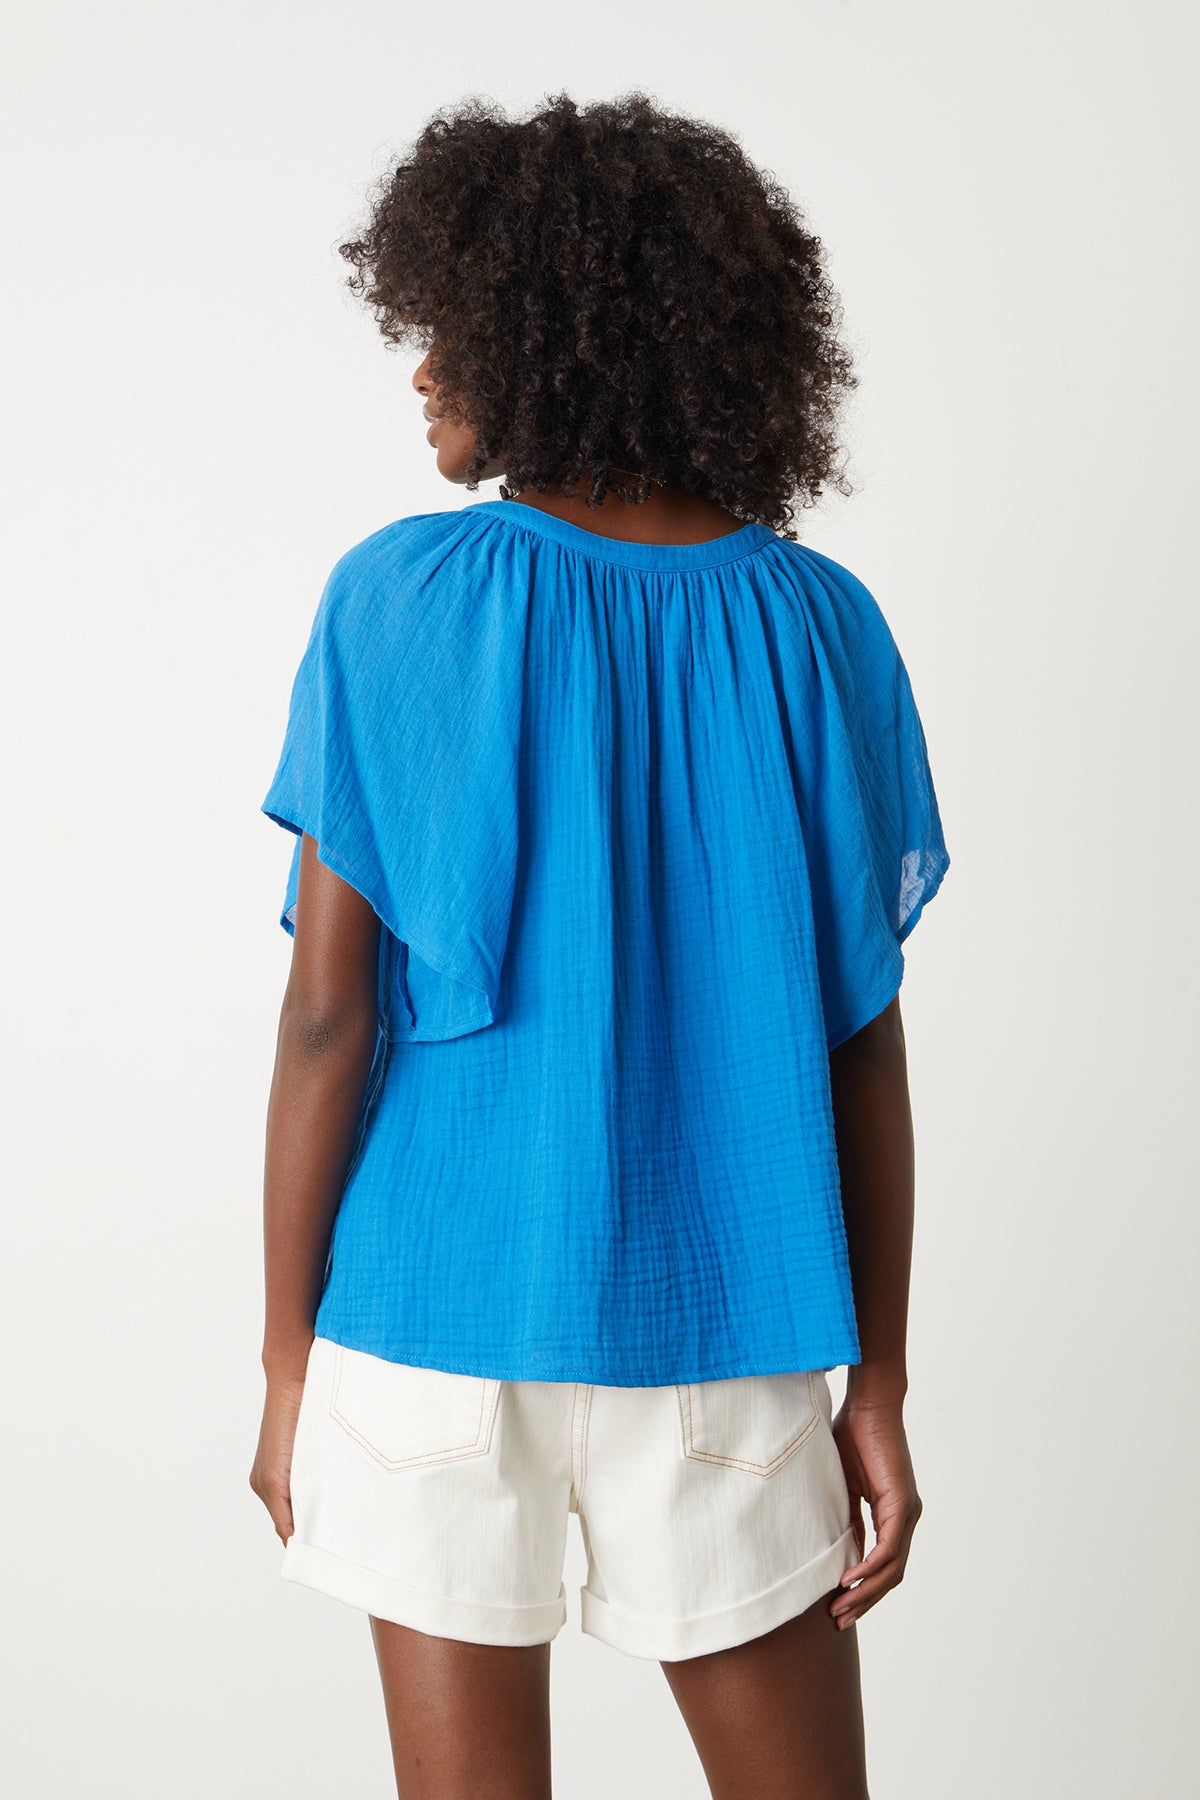 the back view of a woman wearing a Velvet by Graham & Spencer BELLE COTTON GAUZE BLOUSE and shorts.-26342710771905